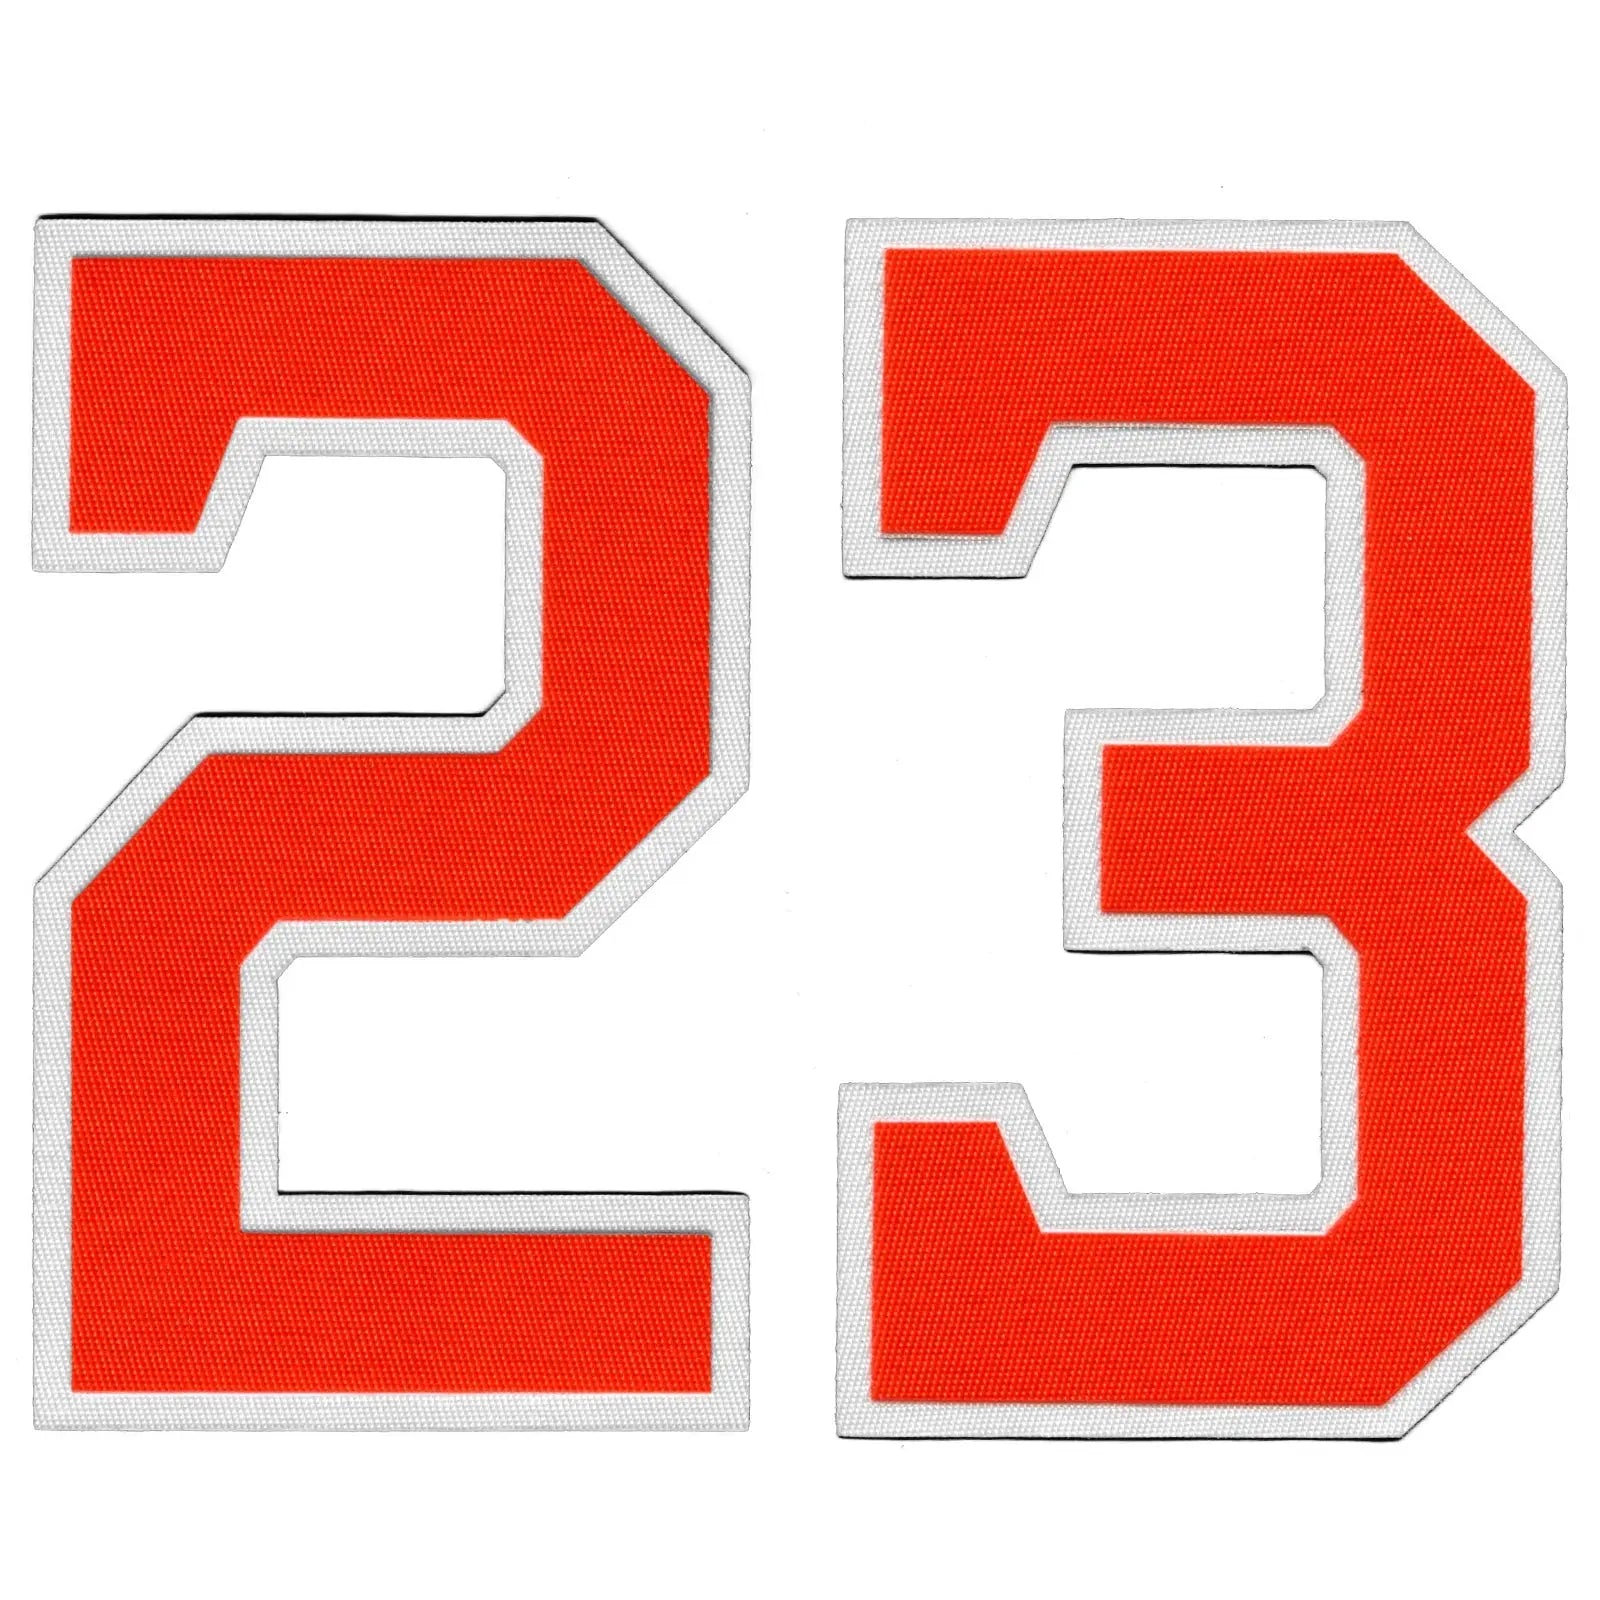 Patch Collection Houston Michael Brantley Front Number 23 Rainbow & Alternate Jersey Lettering Kit Poly Pro Twill Iron-On Regular